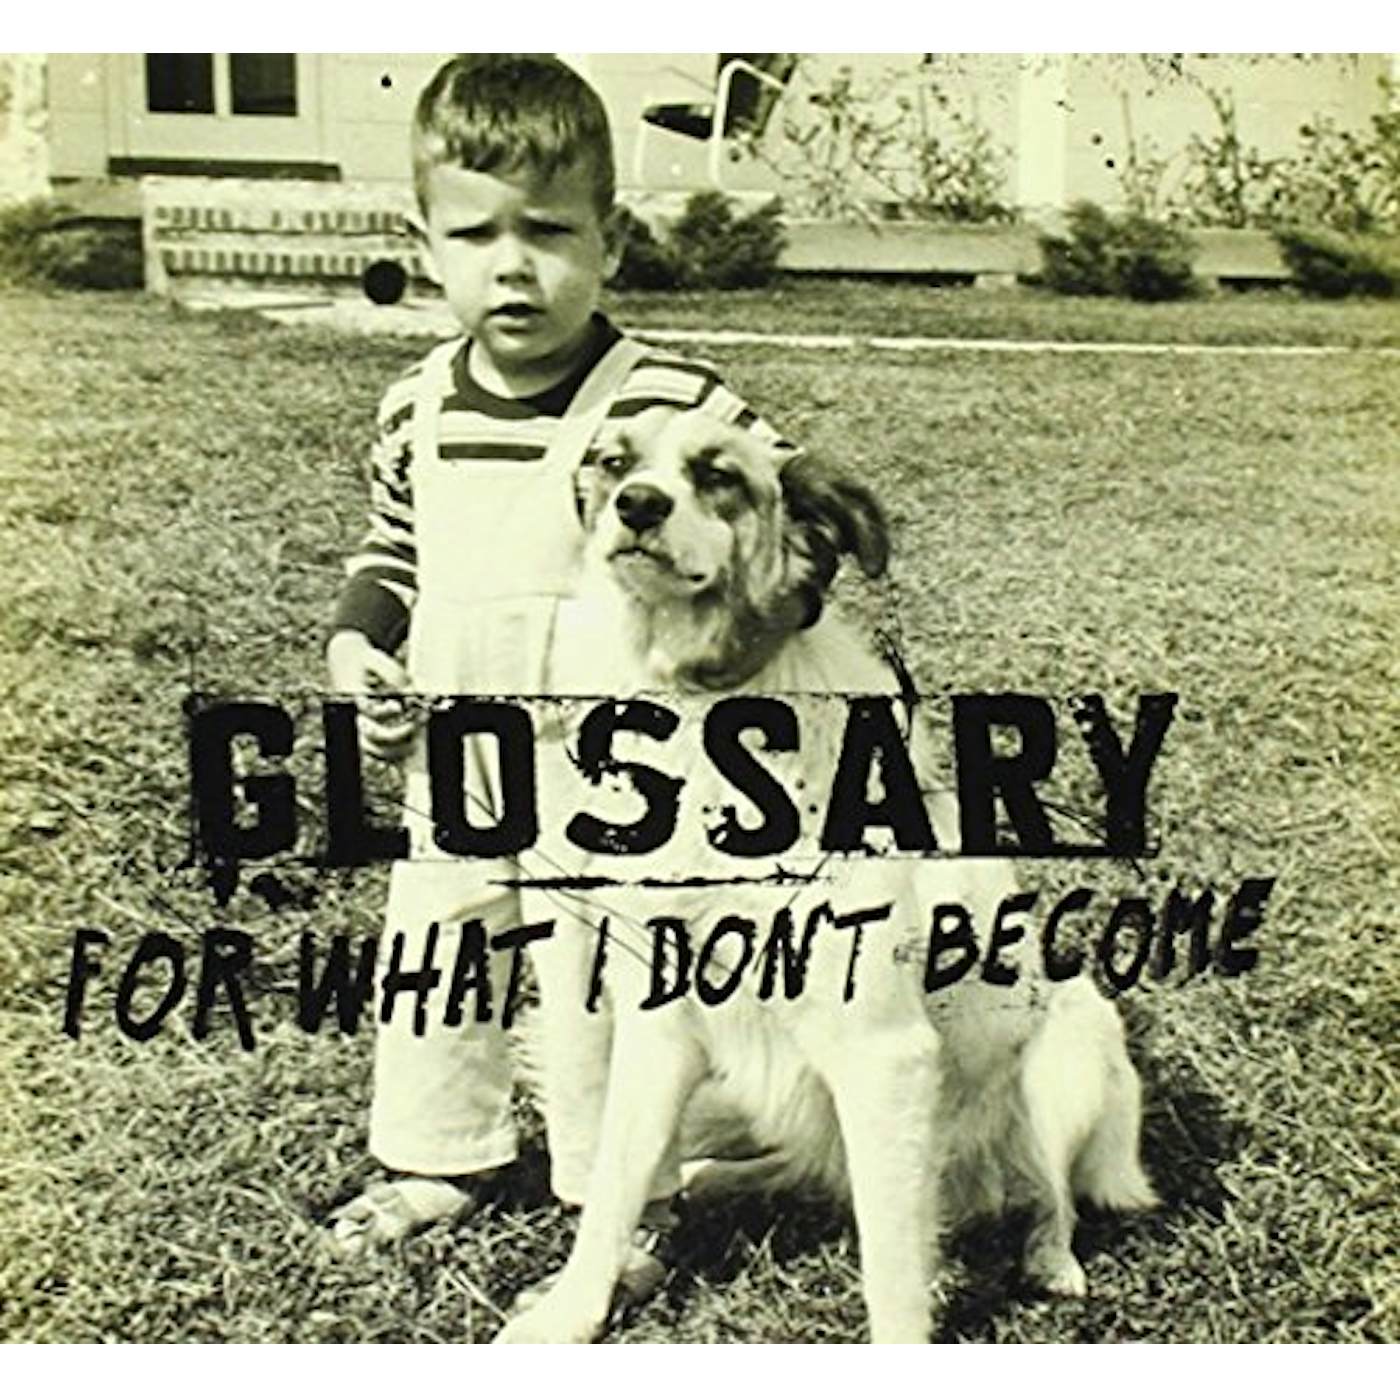 Glossary FOR WHAT I DON'T BECOME CD